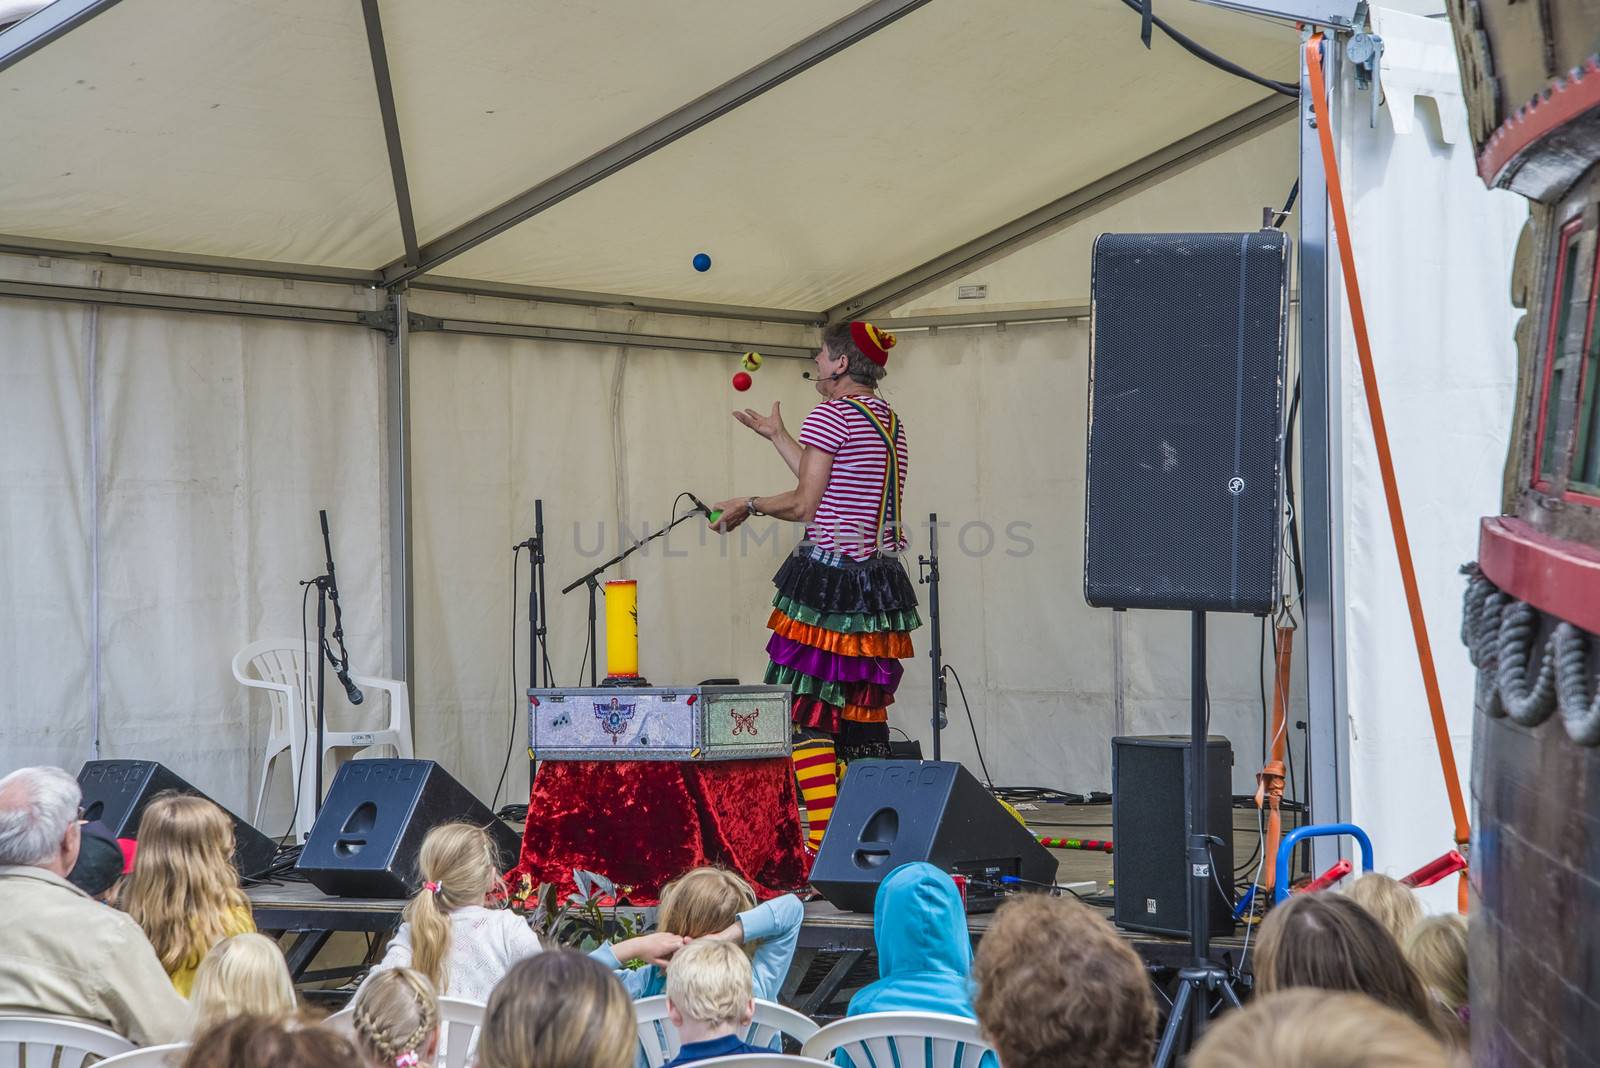 A skilled clown who entertains the kids with juggling, magic tricks and high jinks on Halden squares, Norway.